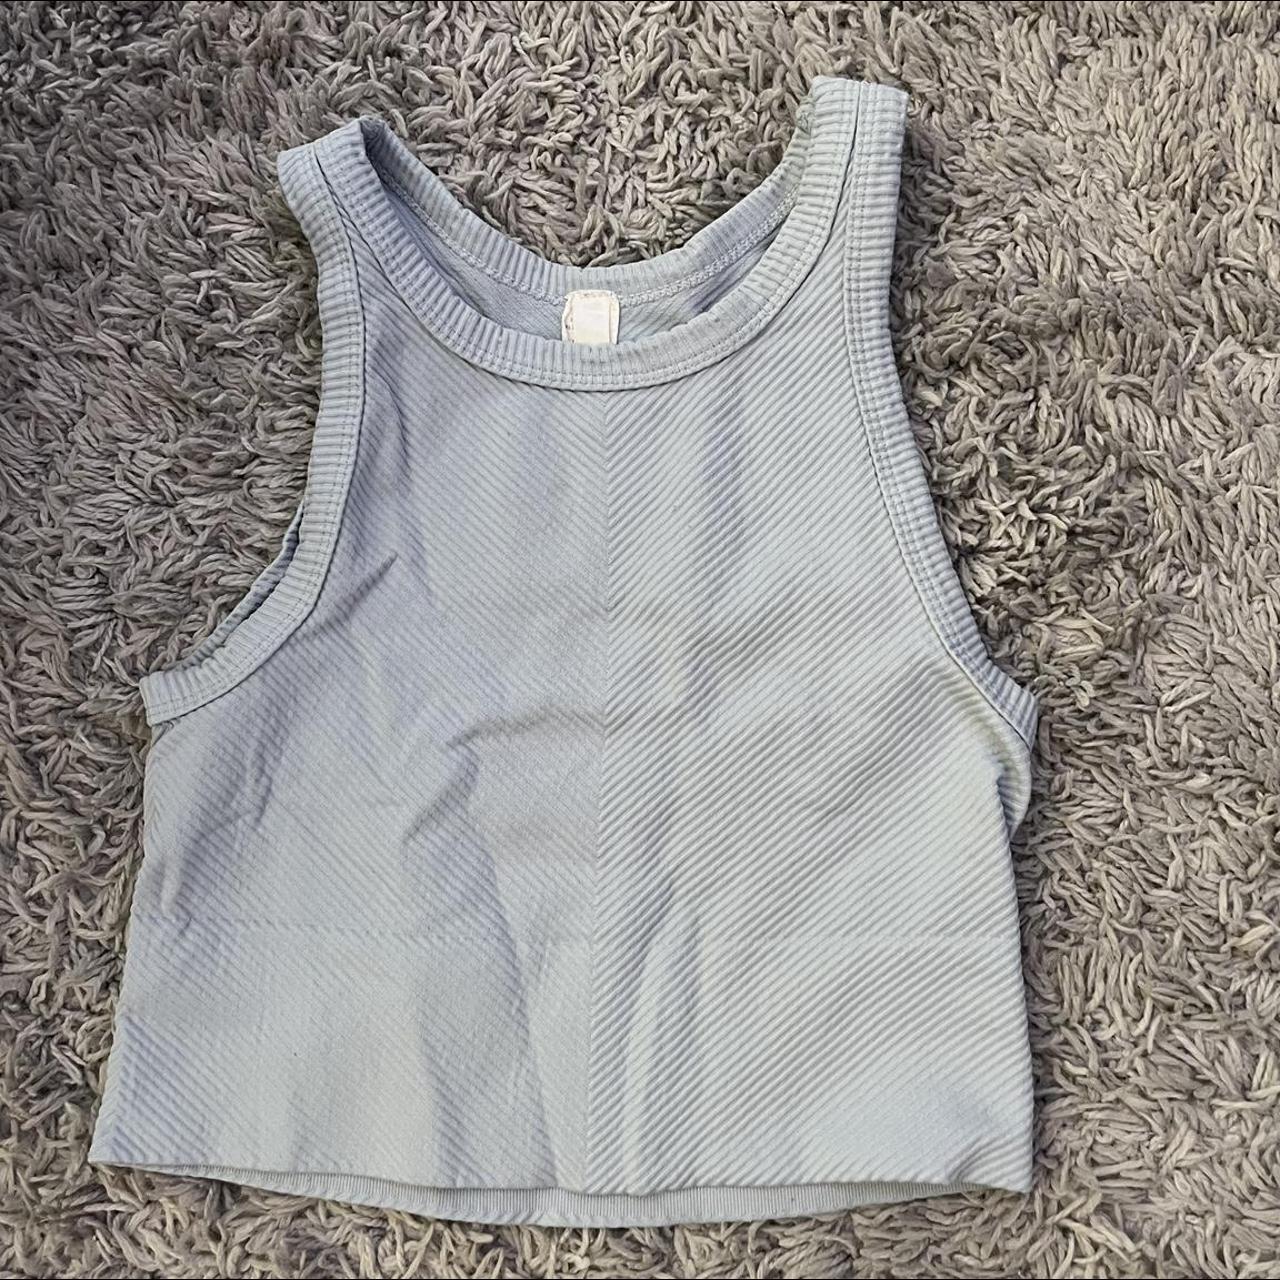 Halter top perfect for summer and workouts Super... - Depop